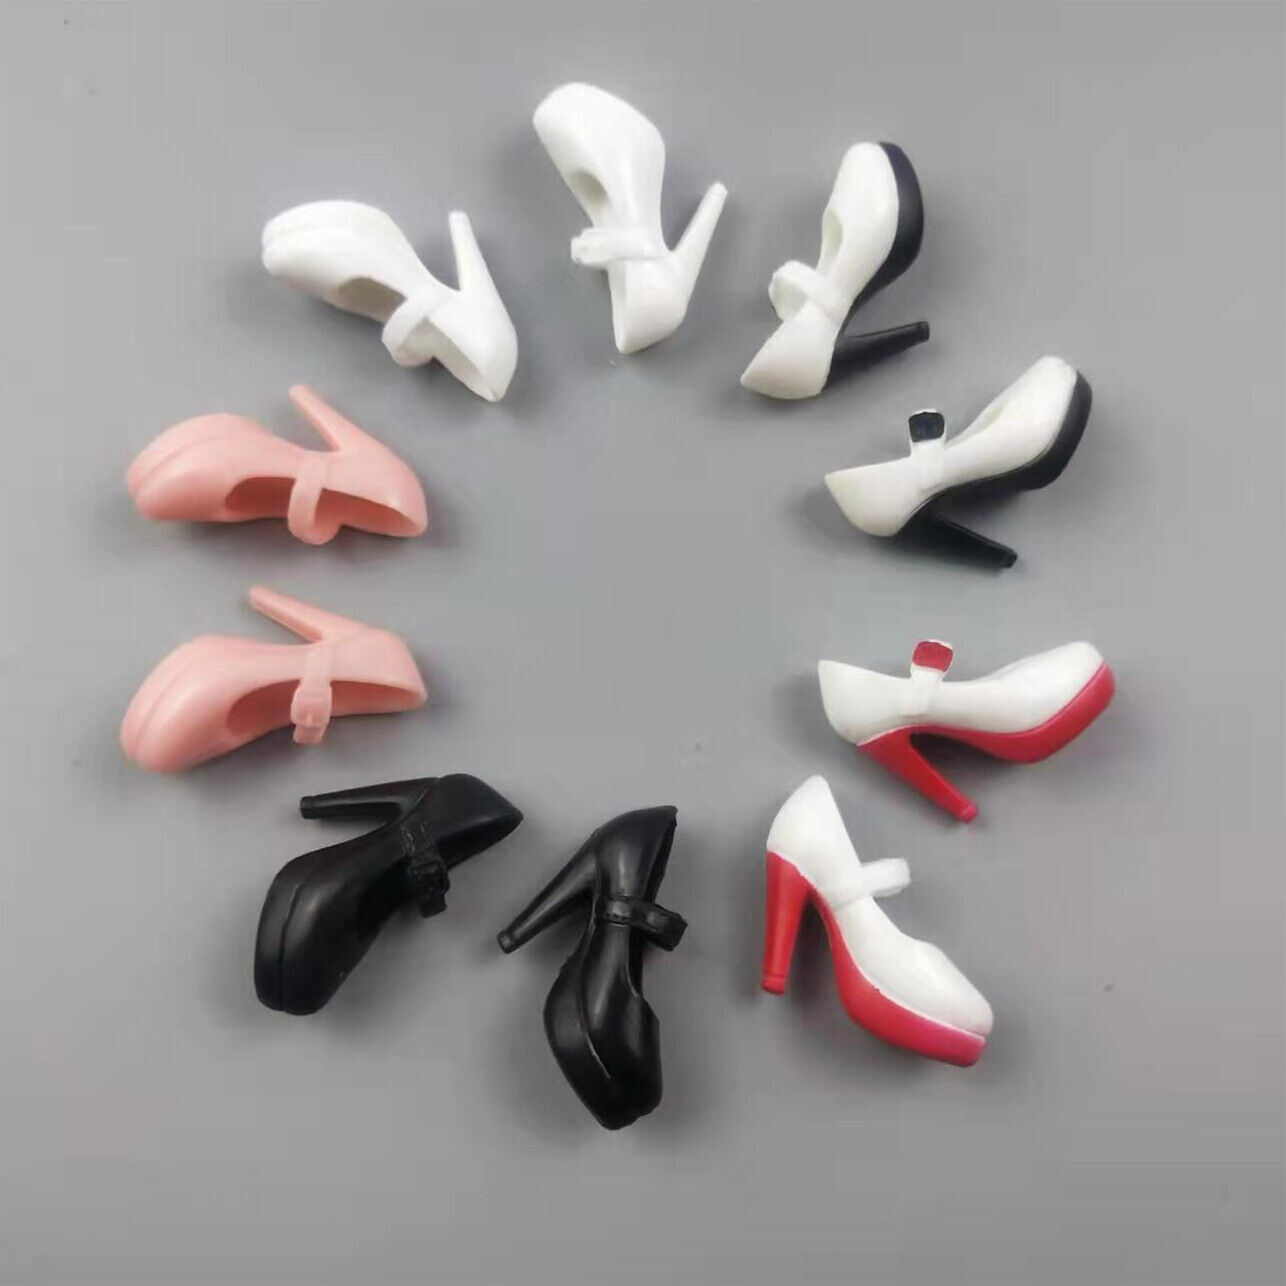 New Fashion 11.5" Barbie Doll High Heels Office Lady Shoes 1/6 Dolls Accessories